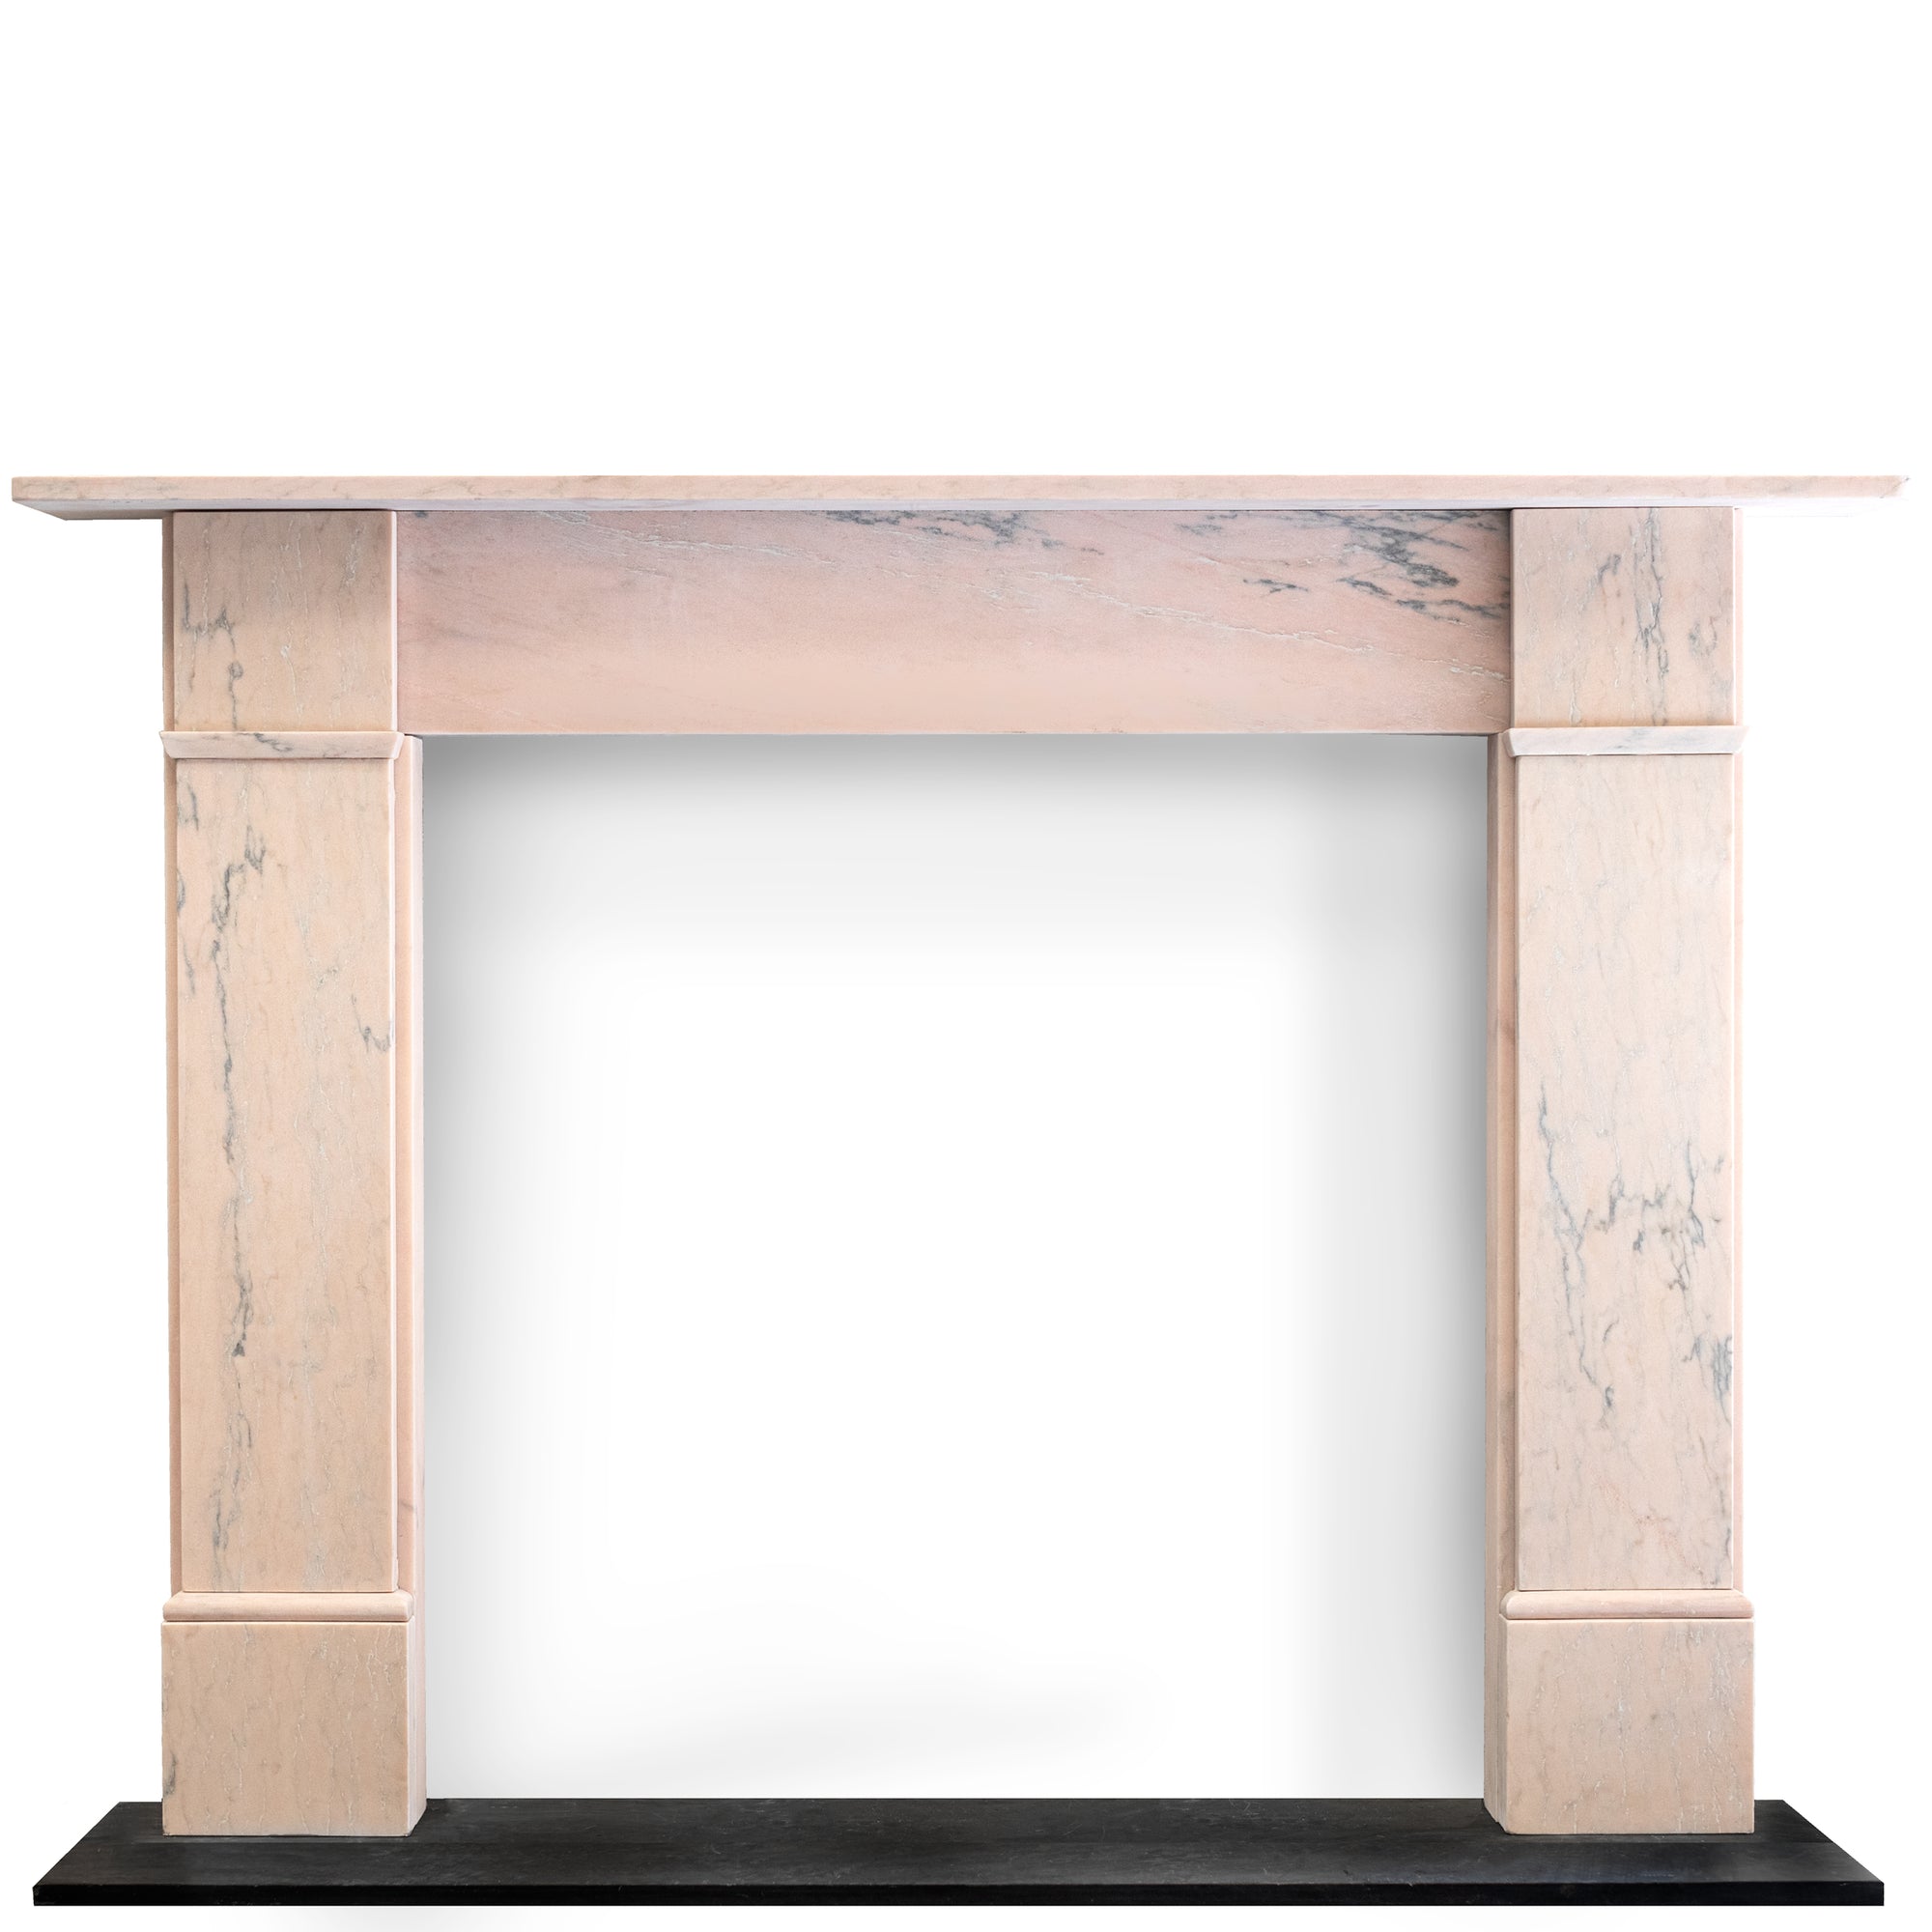 Victorian Style Chimneypiece Made from Reclaimed Pink Marble | The Architectural Forum